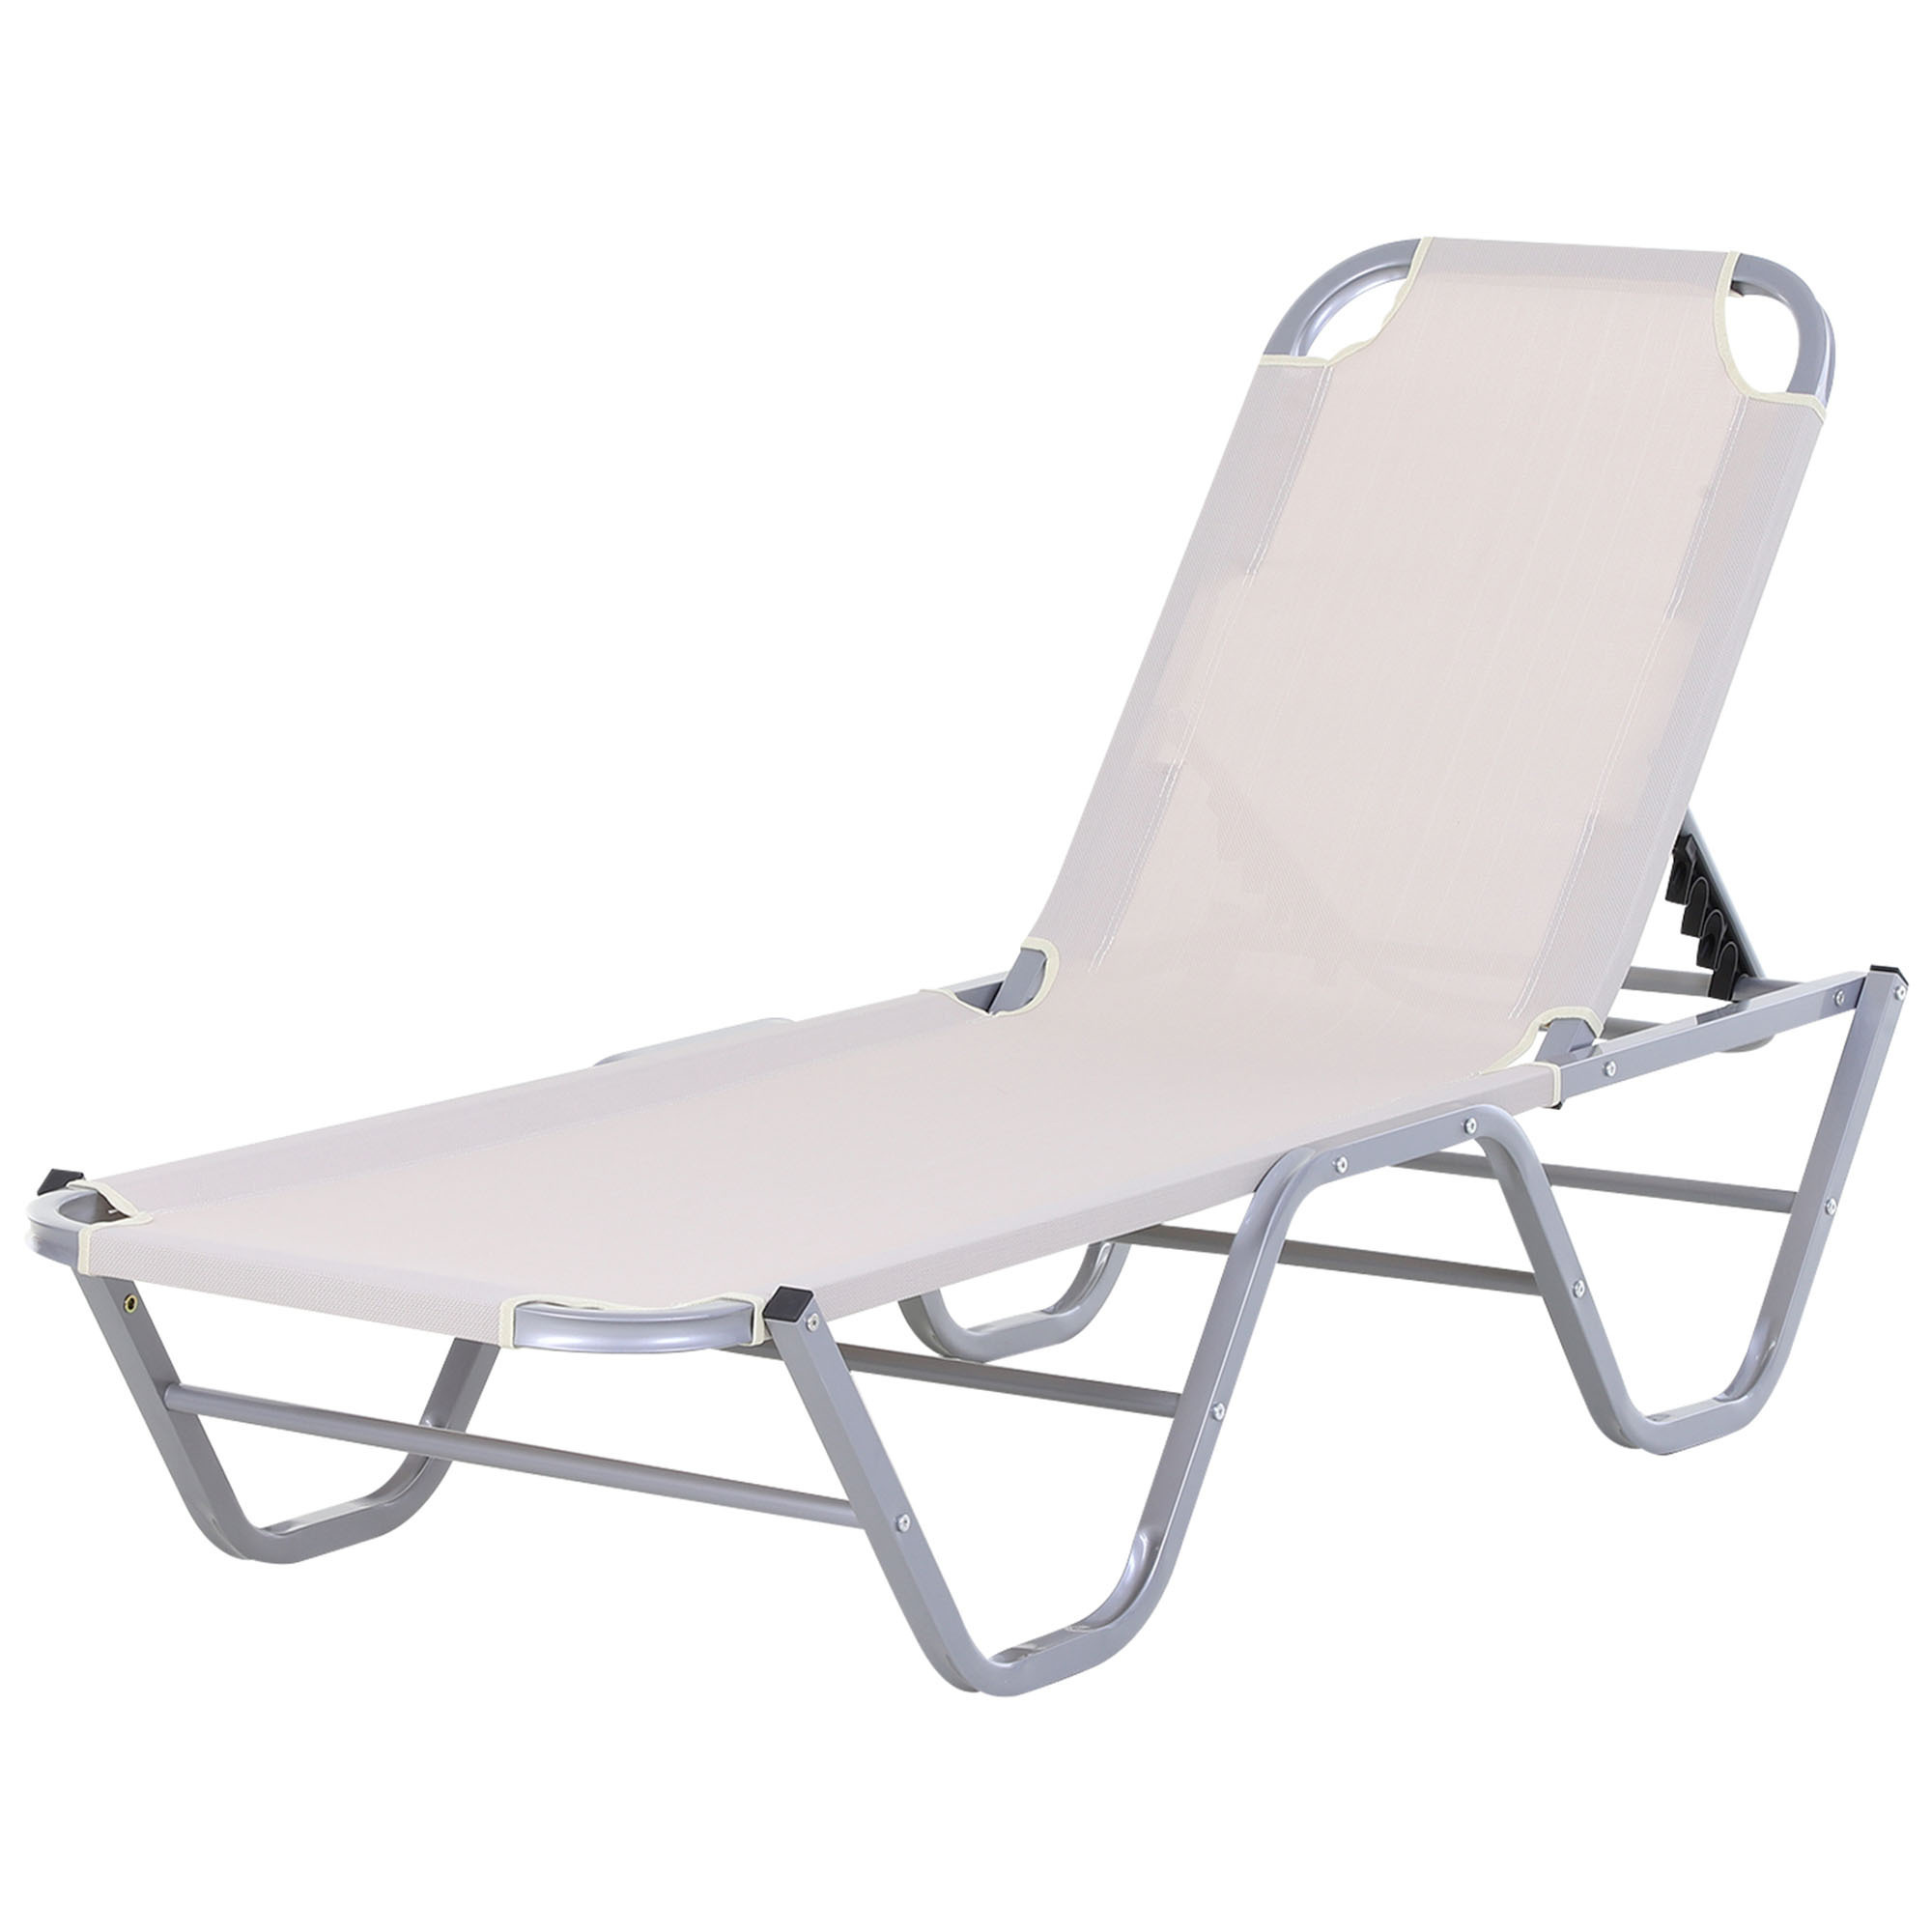 Outsunny Sun Lounger Relaxer Recliner with 5-Position Adjustable Backrest Lightweight Frame for Pool or Sun Bathing Cream White